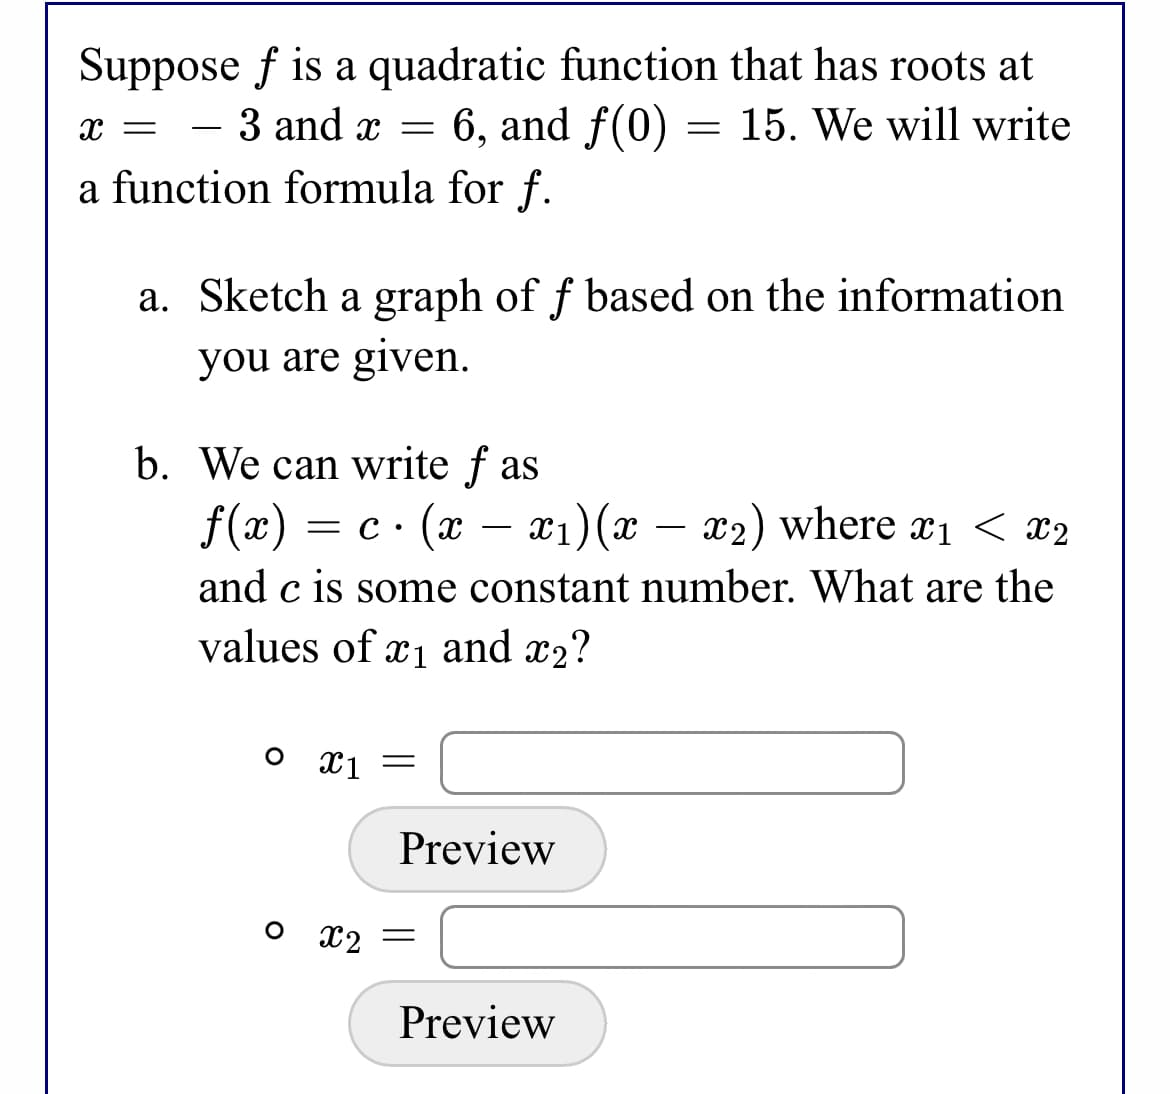 Suppose f is a quadratic function that has roots at
6, and f(0) = 15. We will write
- 3 and x =
a function formula for f.
a. Sketch a graph of f based on the information
you are given.
b. We can write f as
= c · (x – x1)(x
and c is some constant number. What are the
values of x1 and x2?
f(x)
– x2) where x1 < x2
o x1
Preview
o 12
Preview
